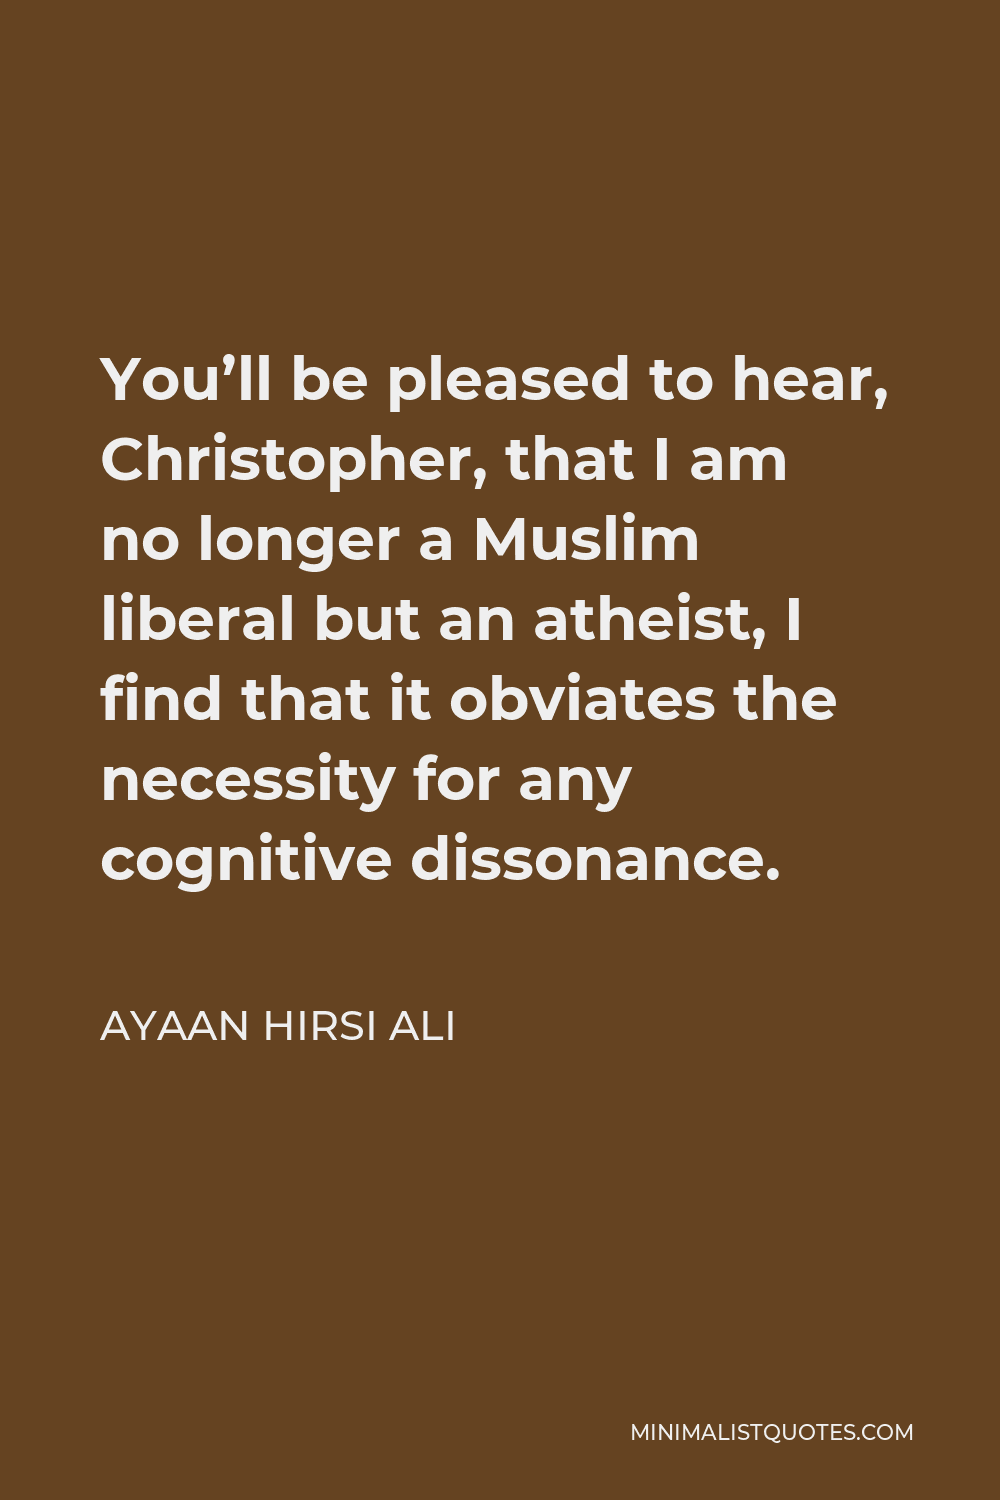 Ayaan Hirsi Ali Quote - You’ll be pleased to hear, Christopher, that I am no longer a Muslim liberal but an atheist, I find that it obviates the necessity for any cognitive dissonance.